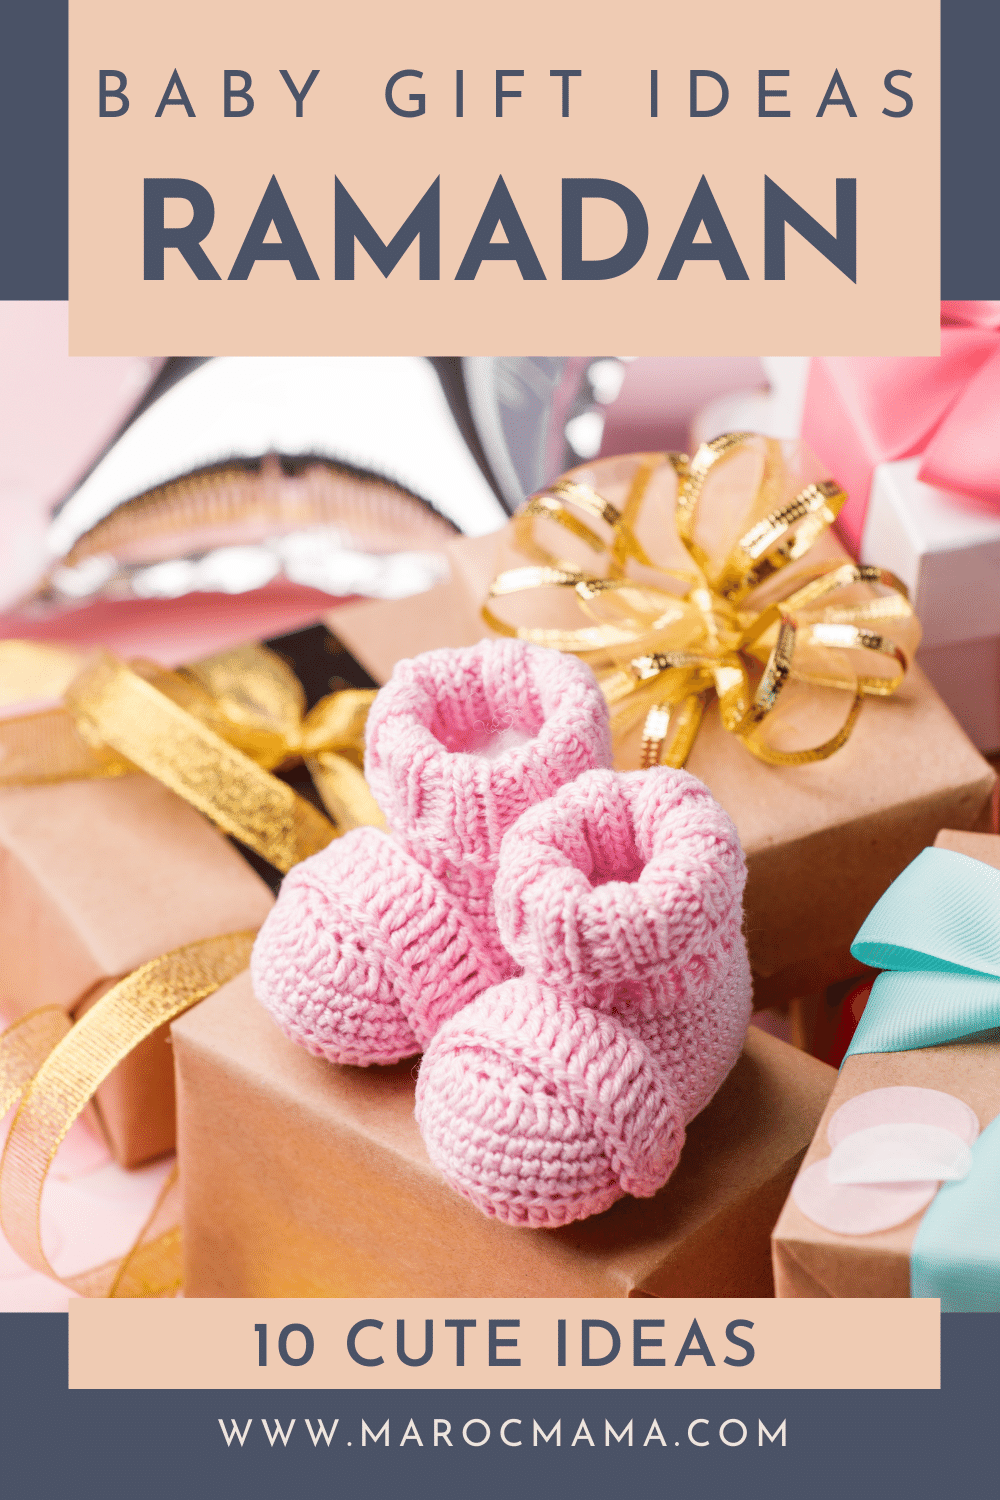 Embroidered baby shoes surrounded by gift boxes with the text Baby Gift Ideas for Ramadan, 10 Cute Ideas